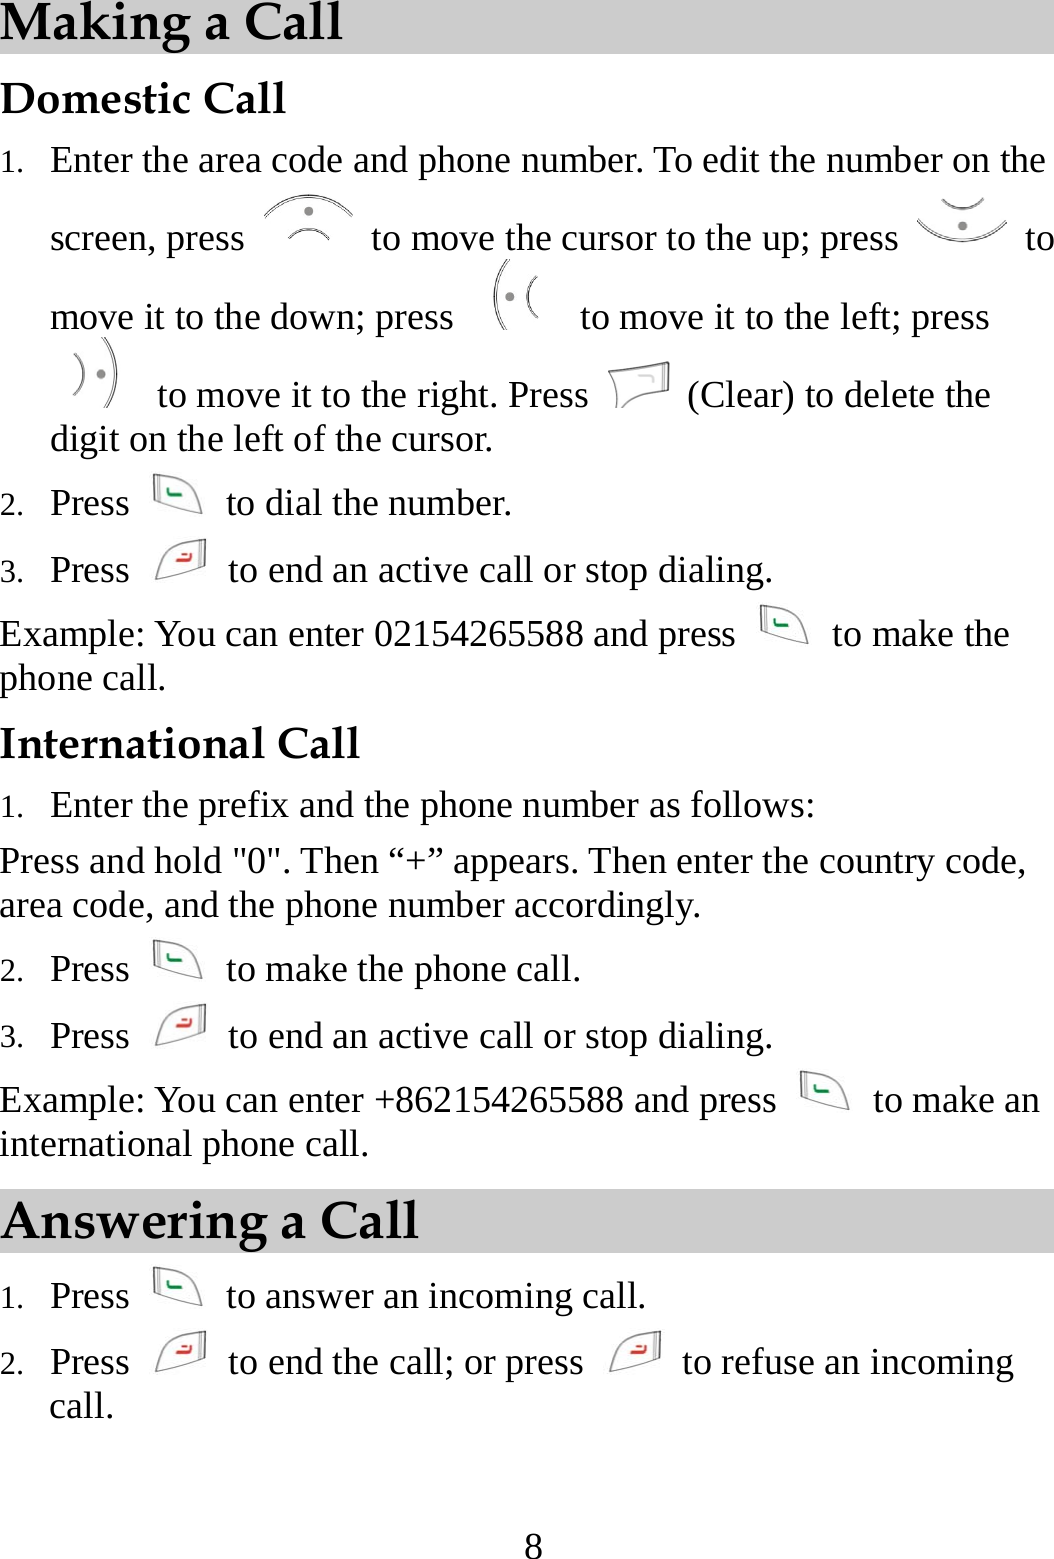  8 Making a Call Domestic Call 1.  Enter the area code and phone number. To edit the number on the screen, press    to move the cursor to the up; press   to move it to the down; press    to move it to the left; press   to move it to the right. Press    (Clear) to delete the digit on the left of the cursor. 2.  Press    to dial the number. 3.  Press    to end an active call or stop dialing. Example: You can enter 02154265588 and press   to make the phone call. International Call 1.  Enter the prefix and the phone number as follows: Press and hold &quot;0&quot;. Then “+” appears. Then enter the country code, area code, and the phone number accordingly. 2.  Press    to make the phone call. 3.  Press    to end an active call or stop dialing. Example: You can enter +862154265588 and press    to make an international phone call. Answering a Call 1.  Press    to answer an incoming call. 2.  Press    to end the call; or press    to refuse an incoming call. 